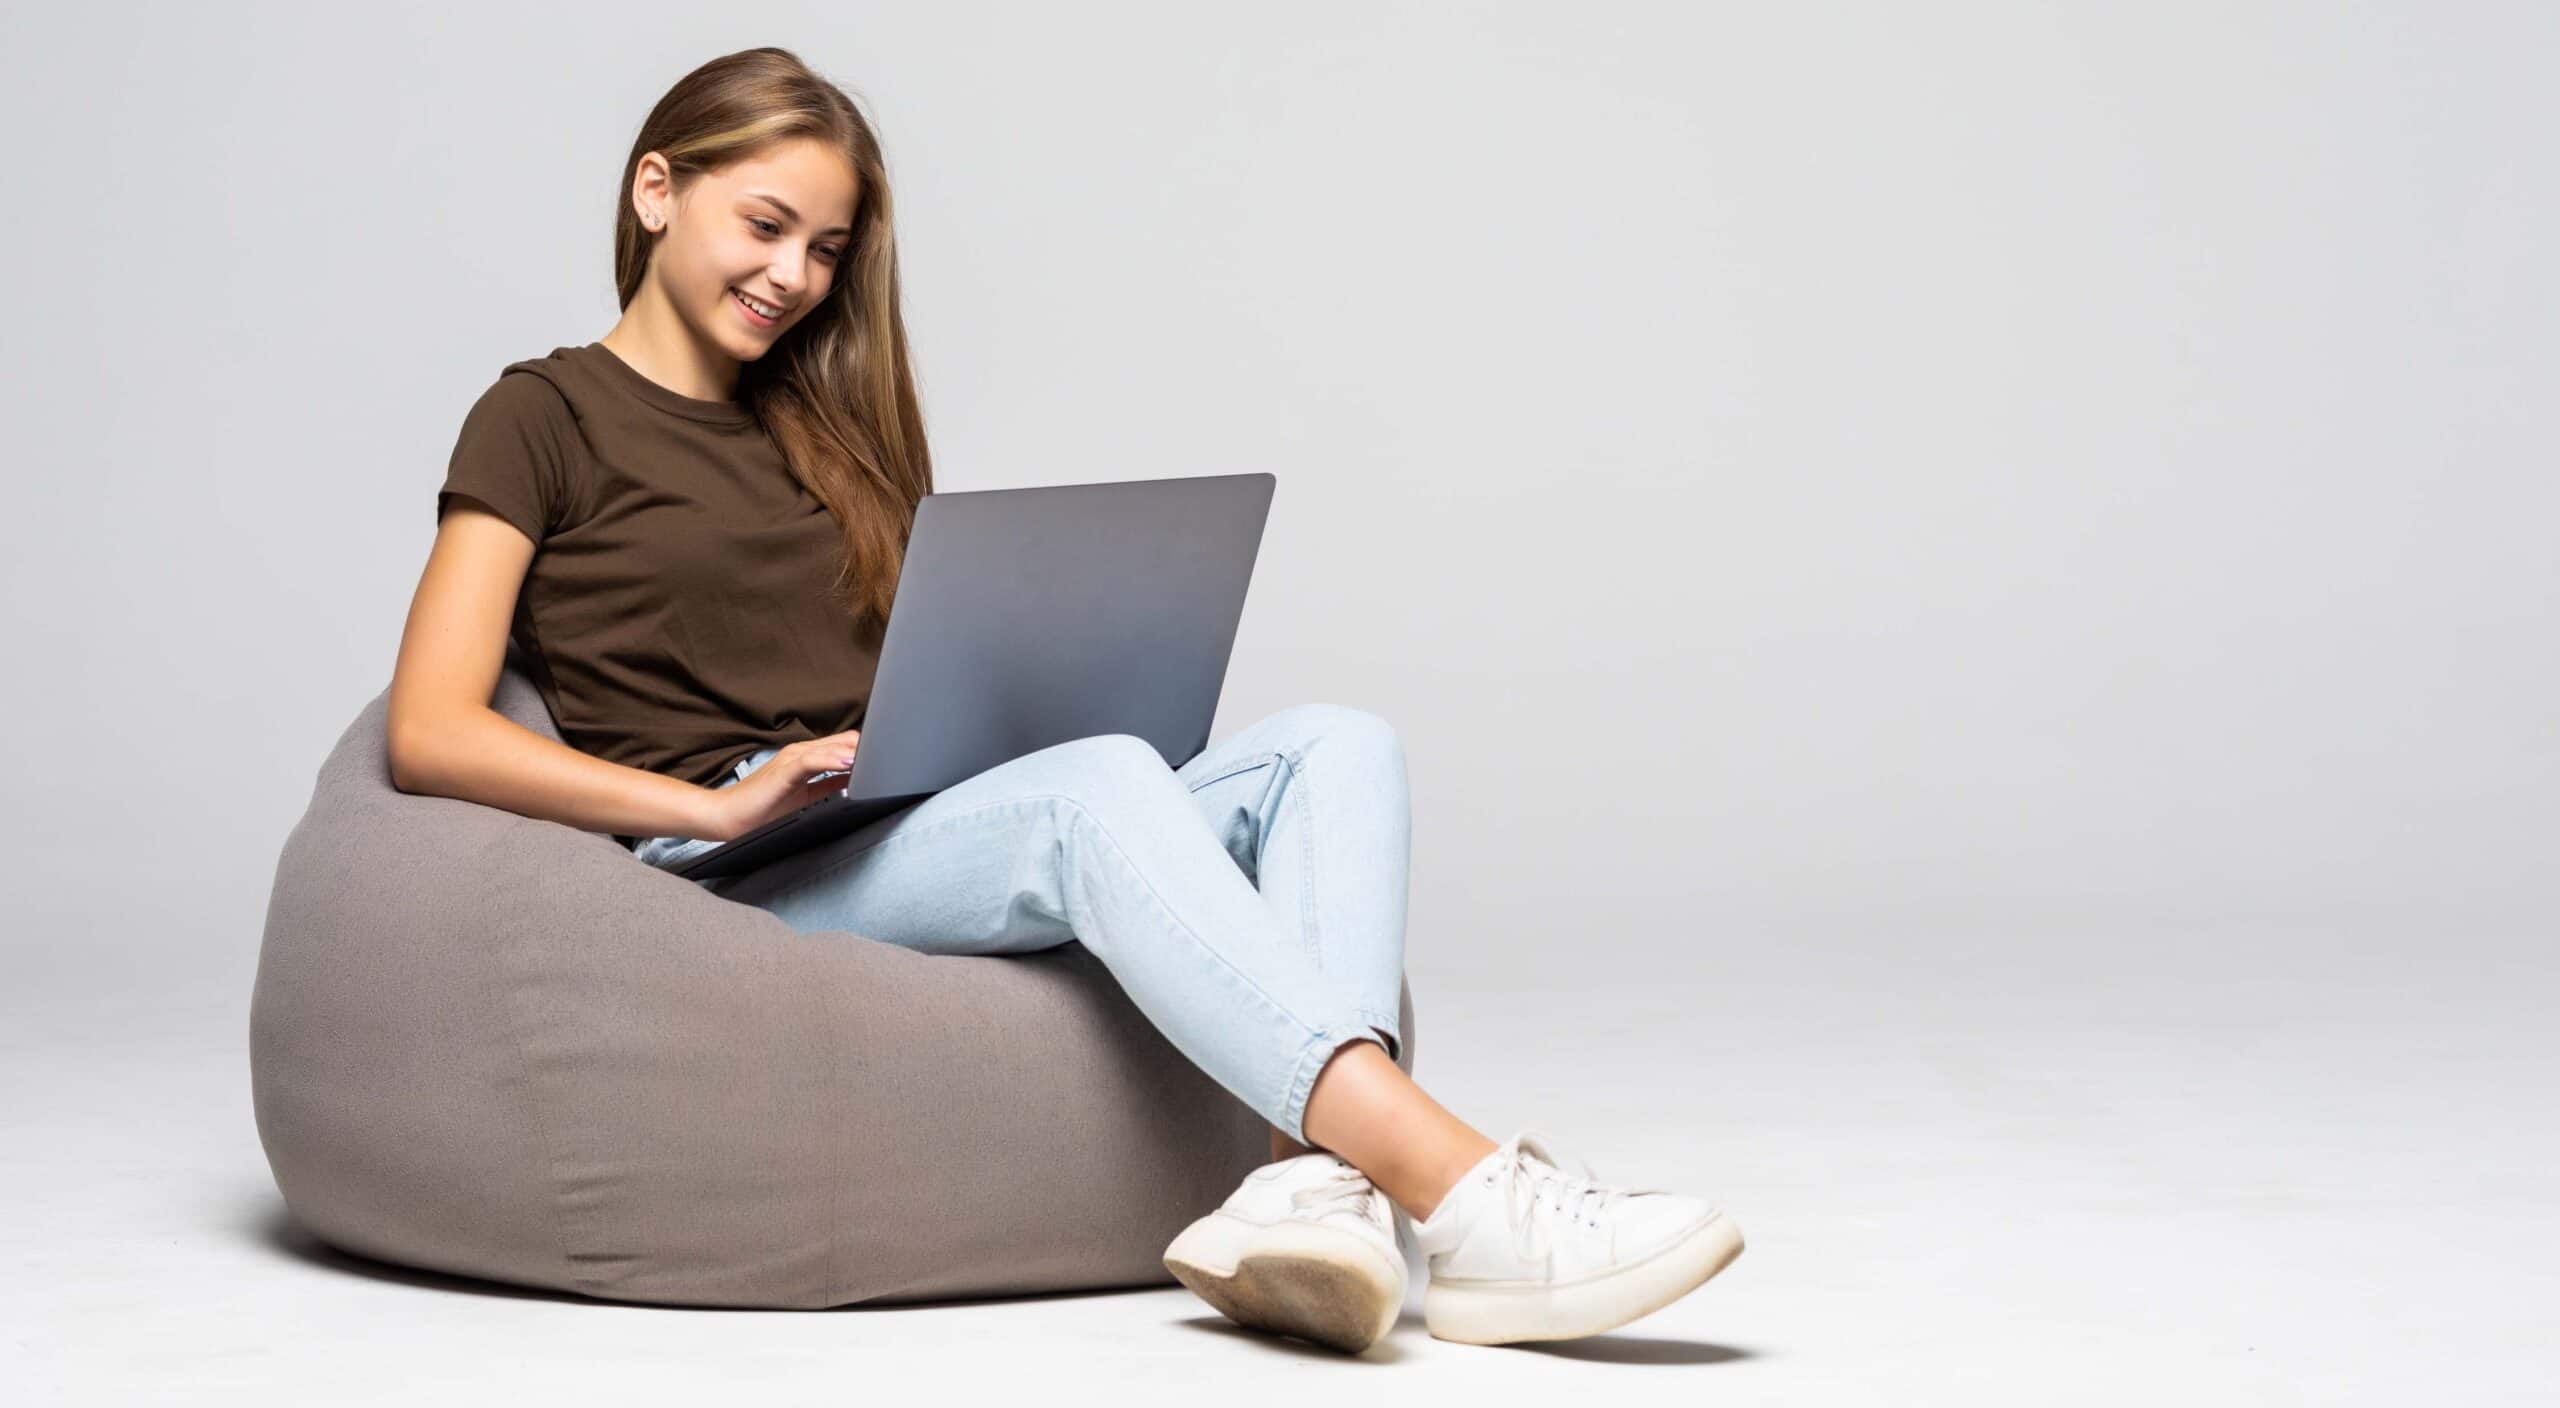 Woman sitting on a bean bag chair using her laptop